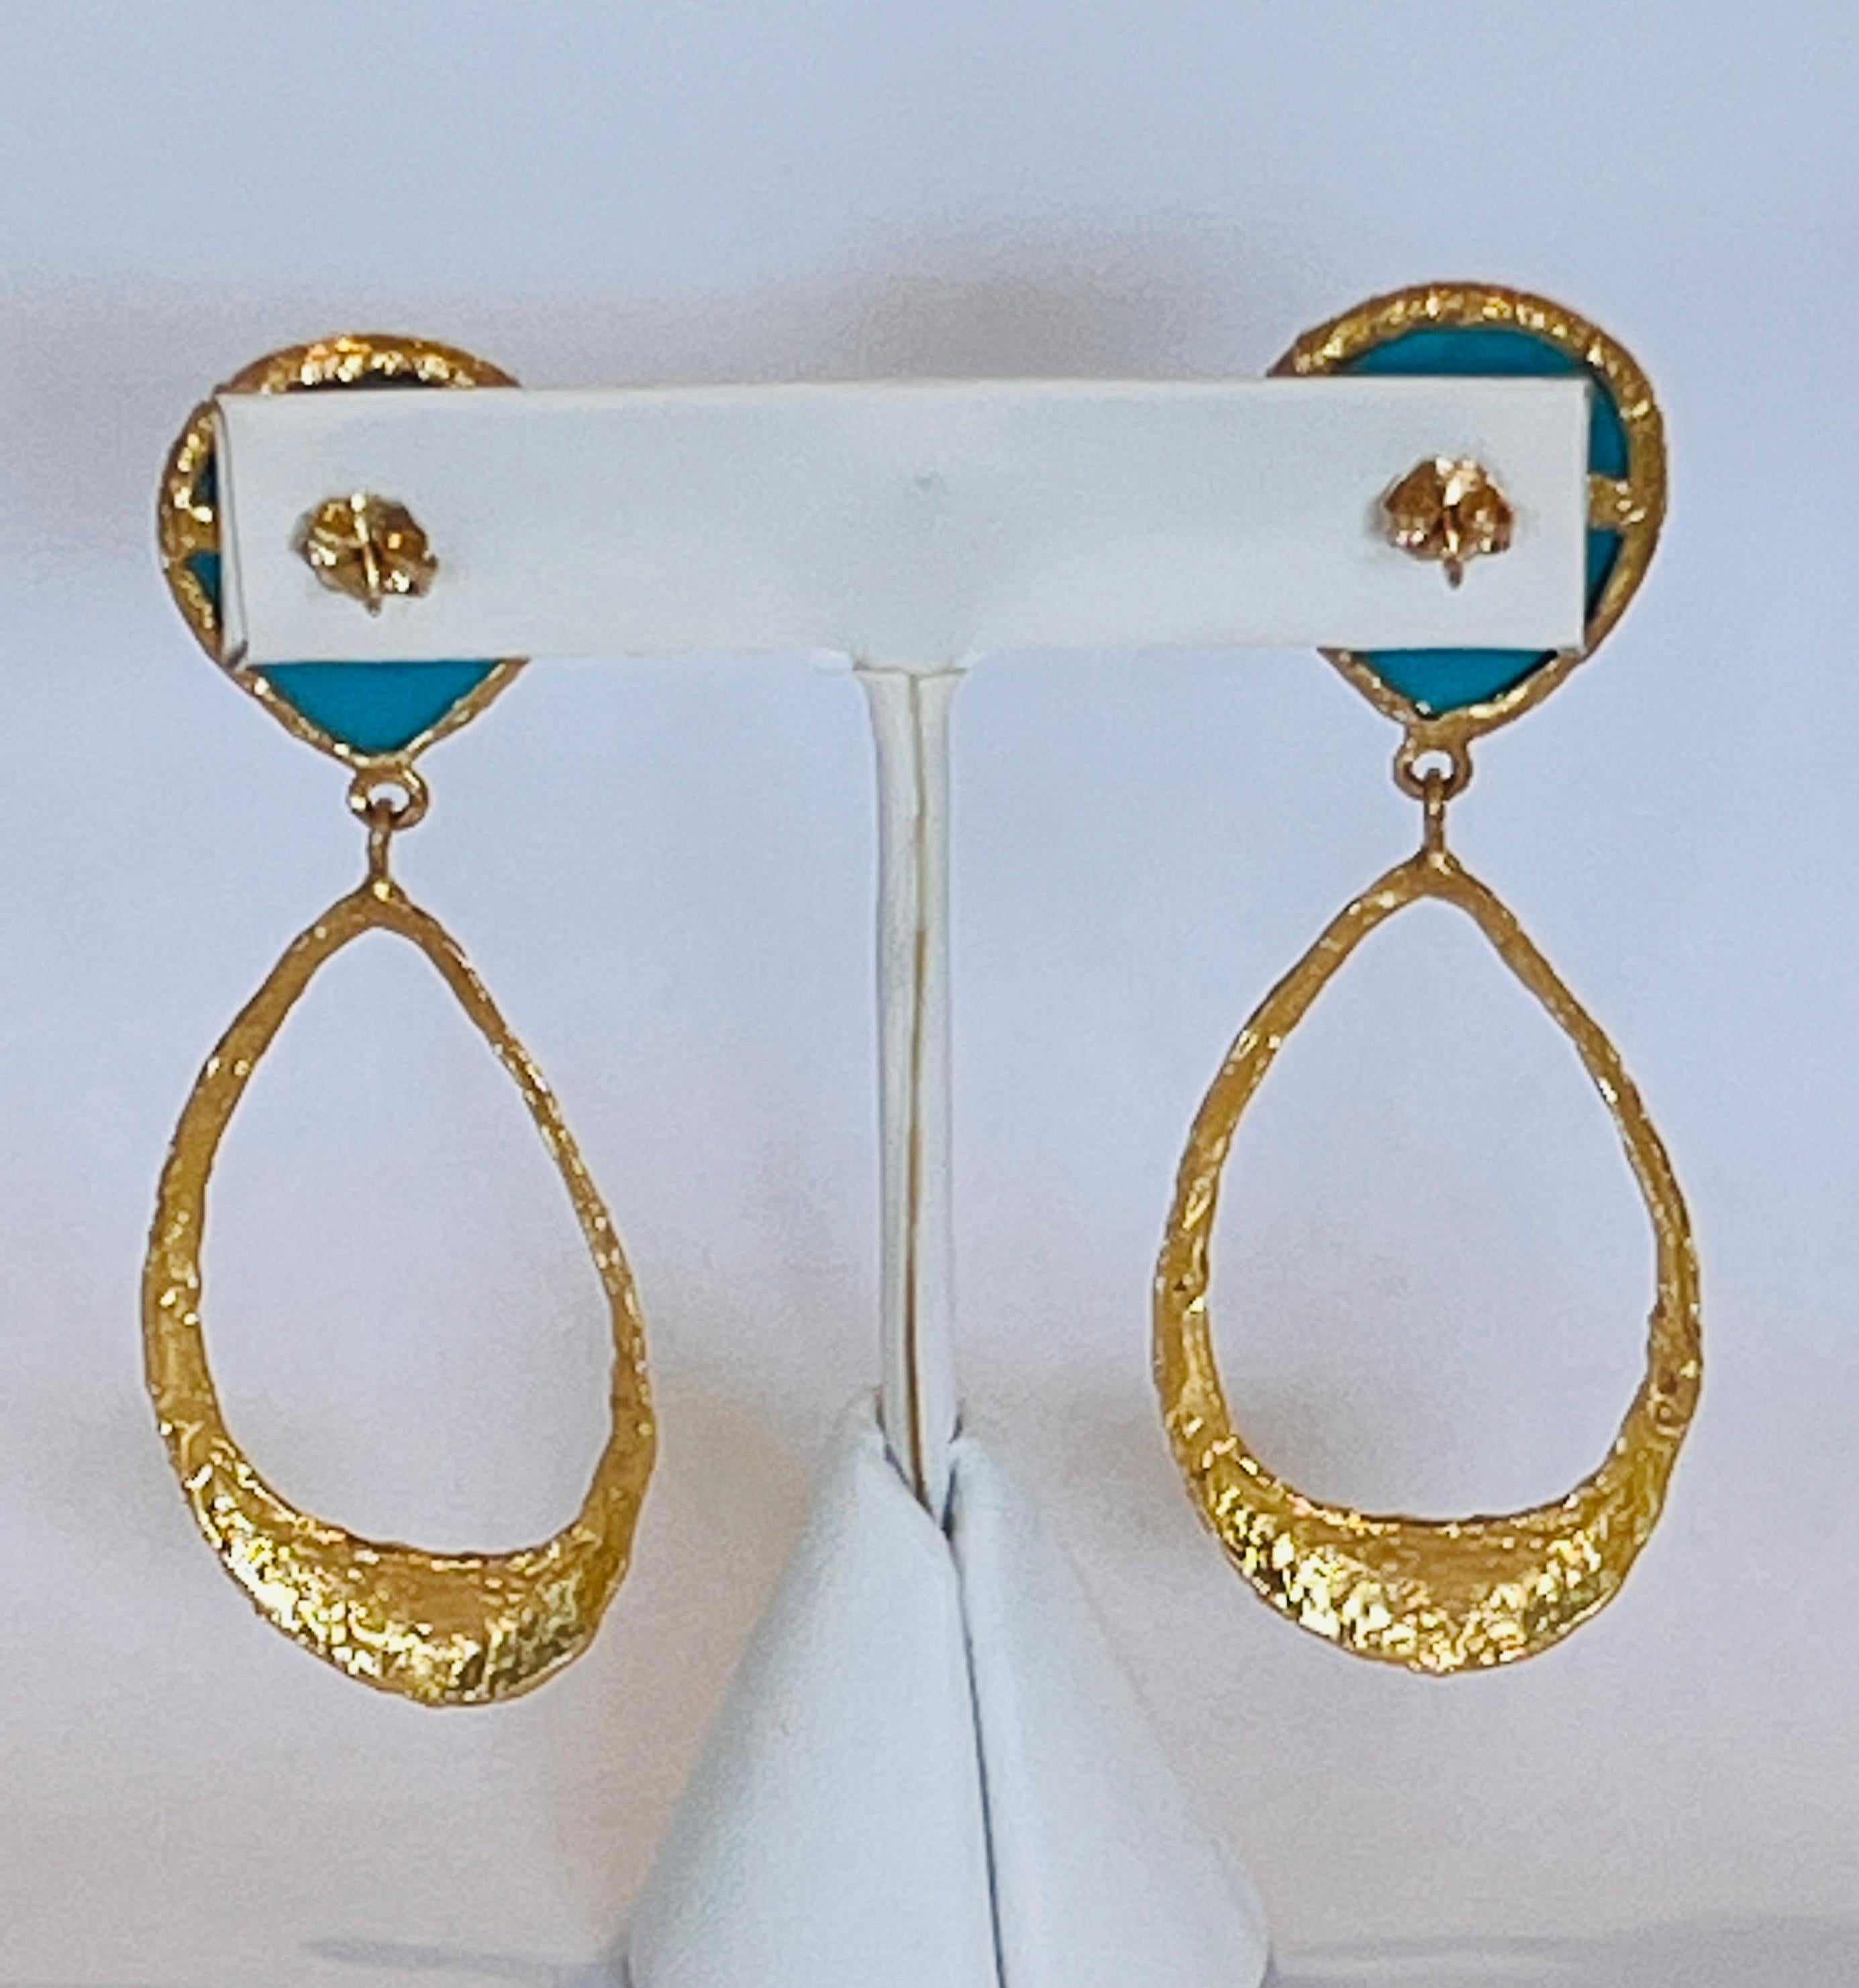 Tagili Signature Teardrop Earrings with Turquoise in 22k Gold For Sale 2